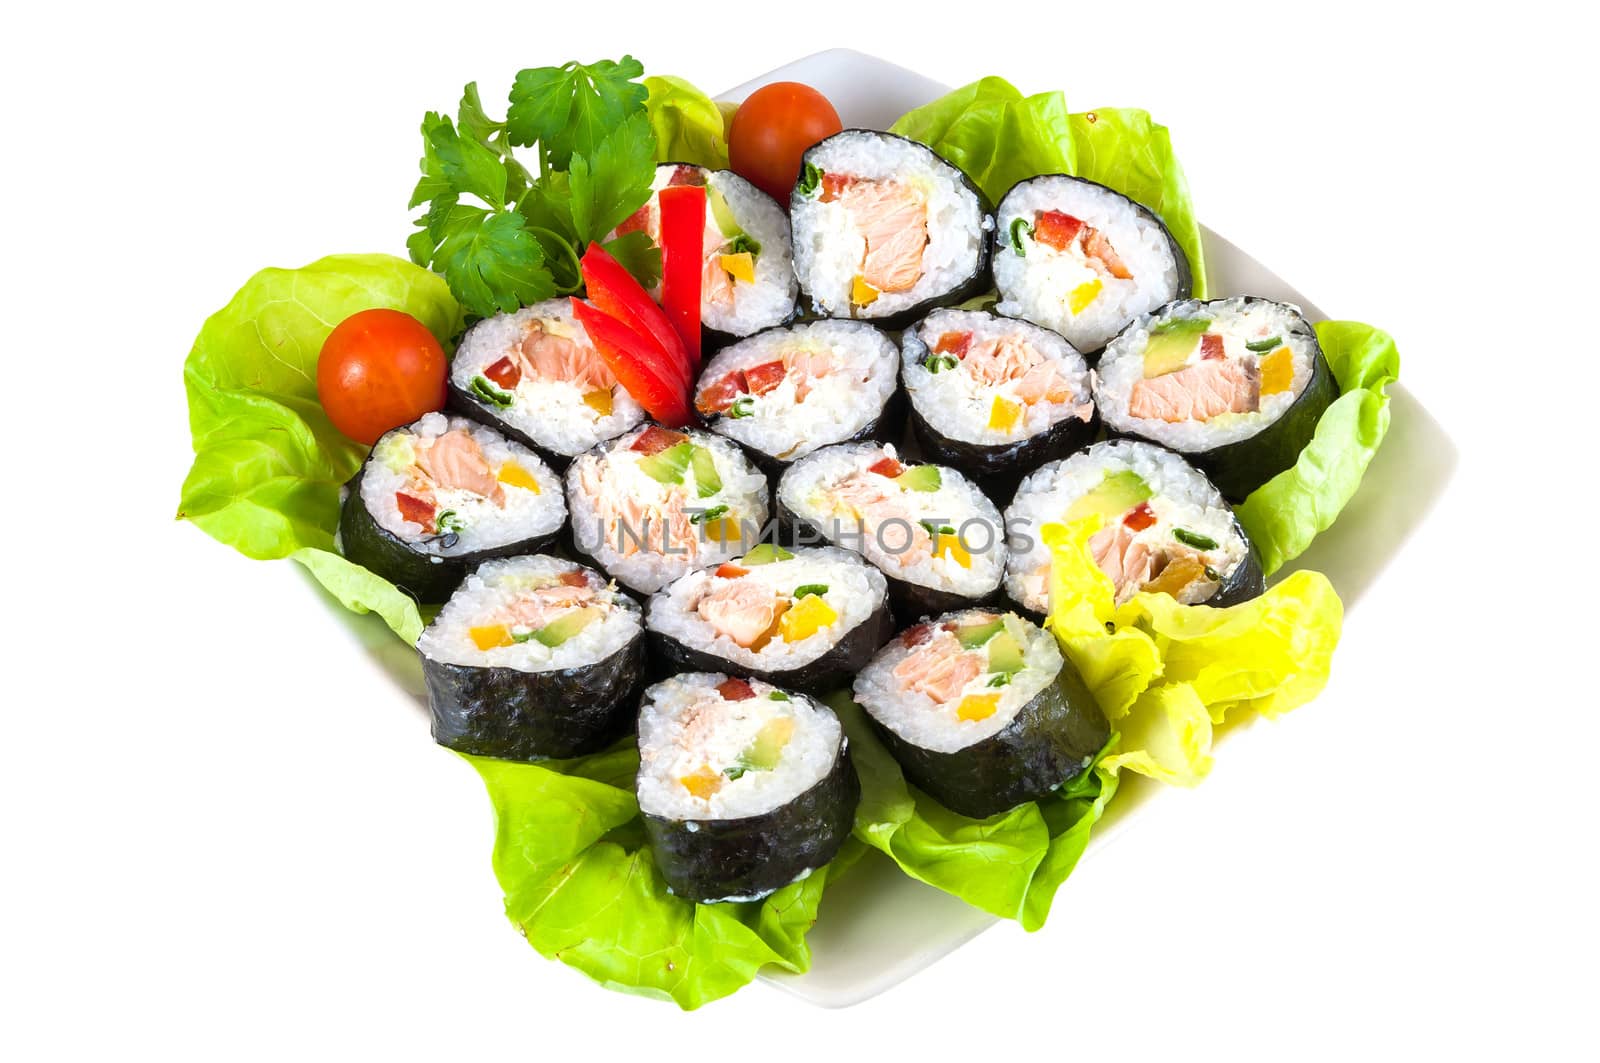 Decorated plate of sushi by mkos83